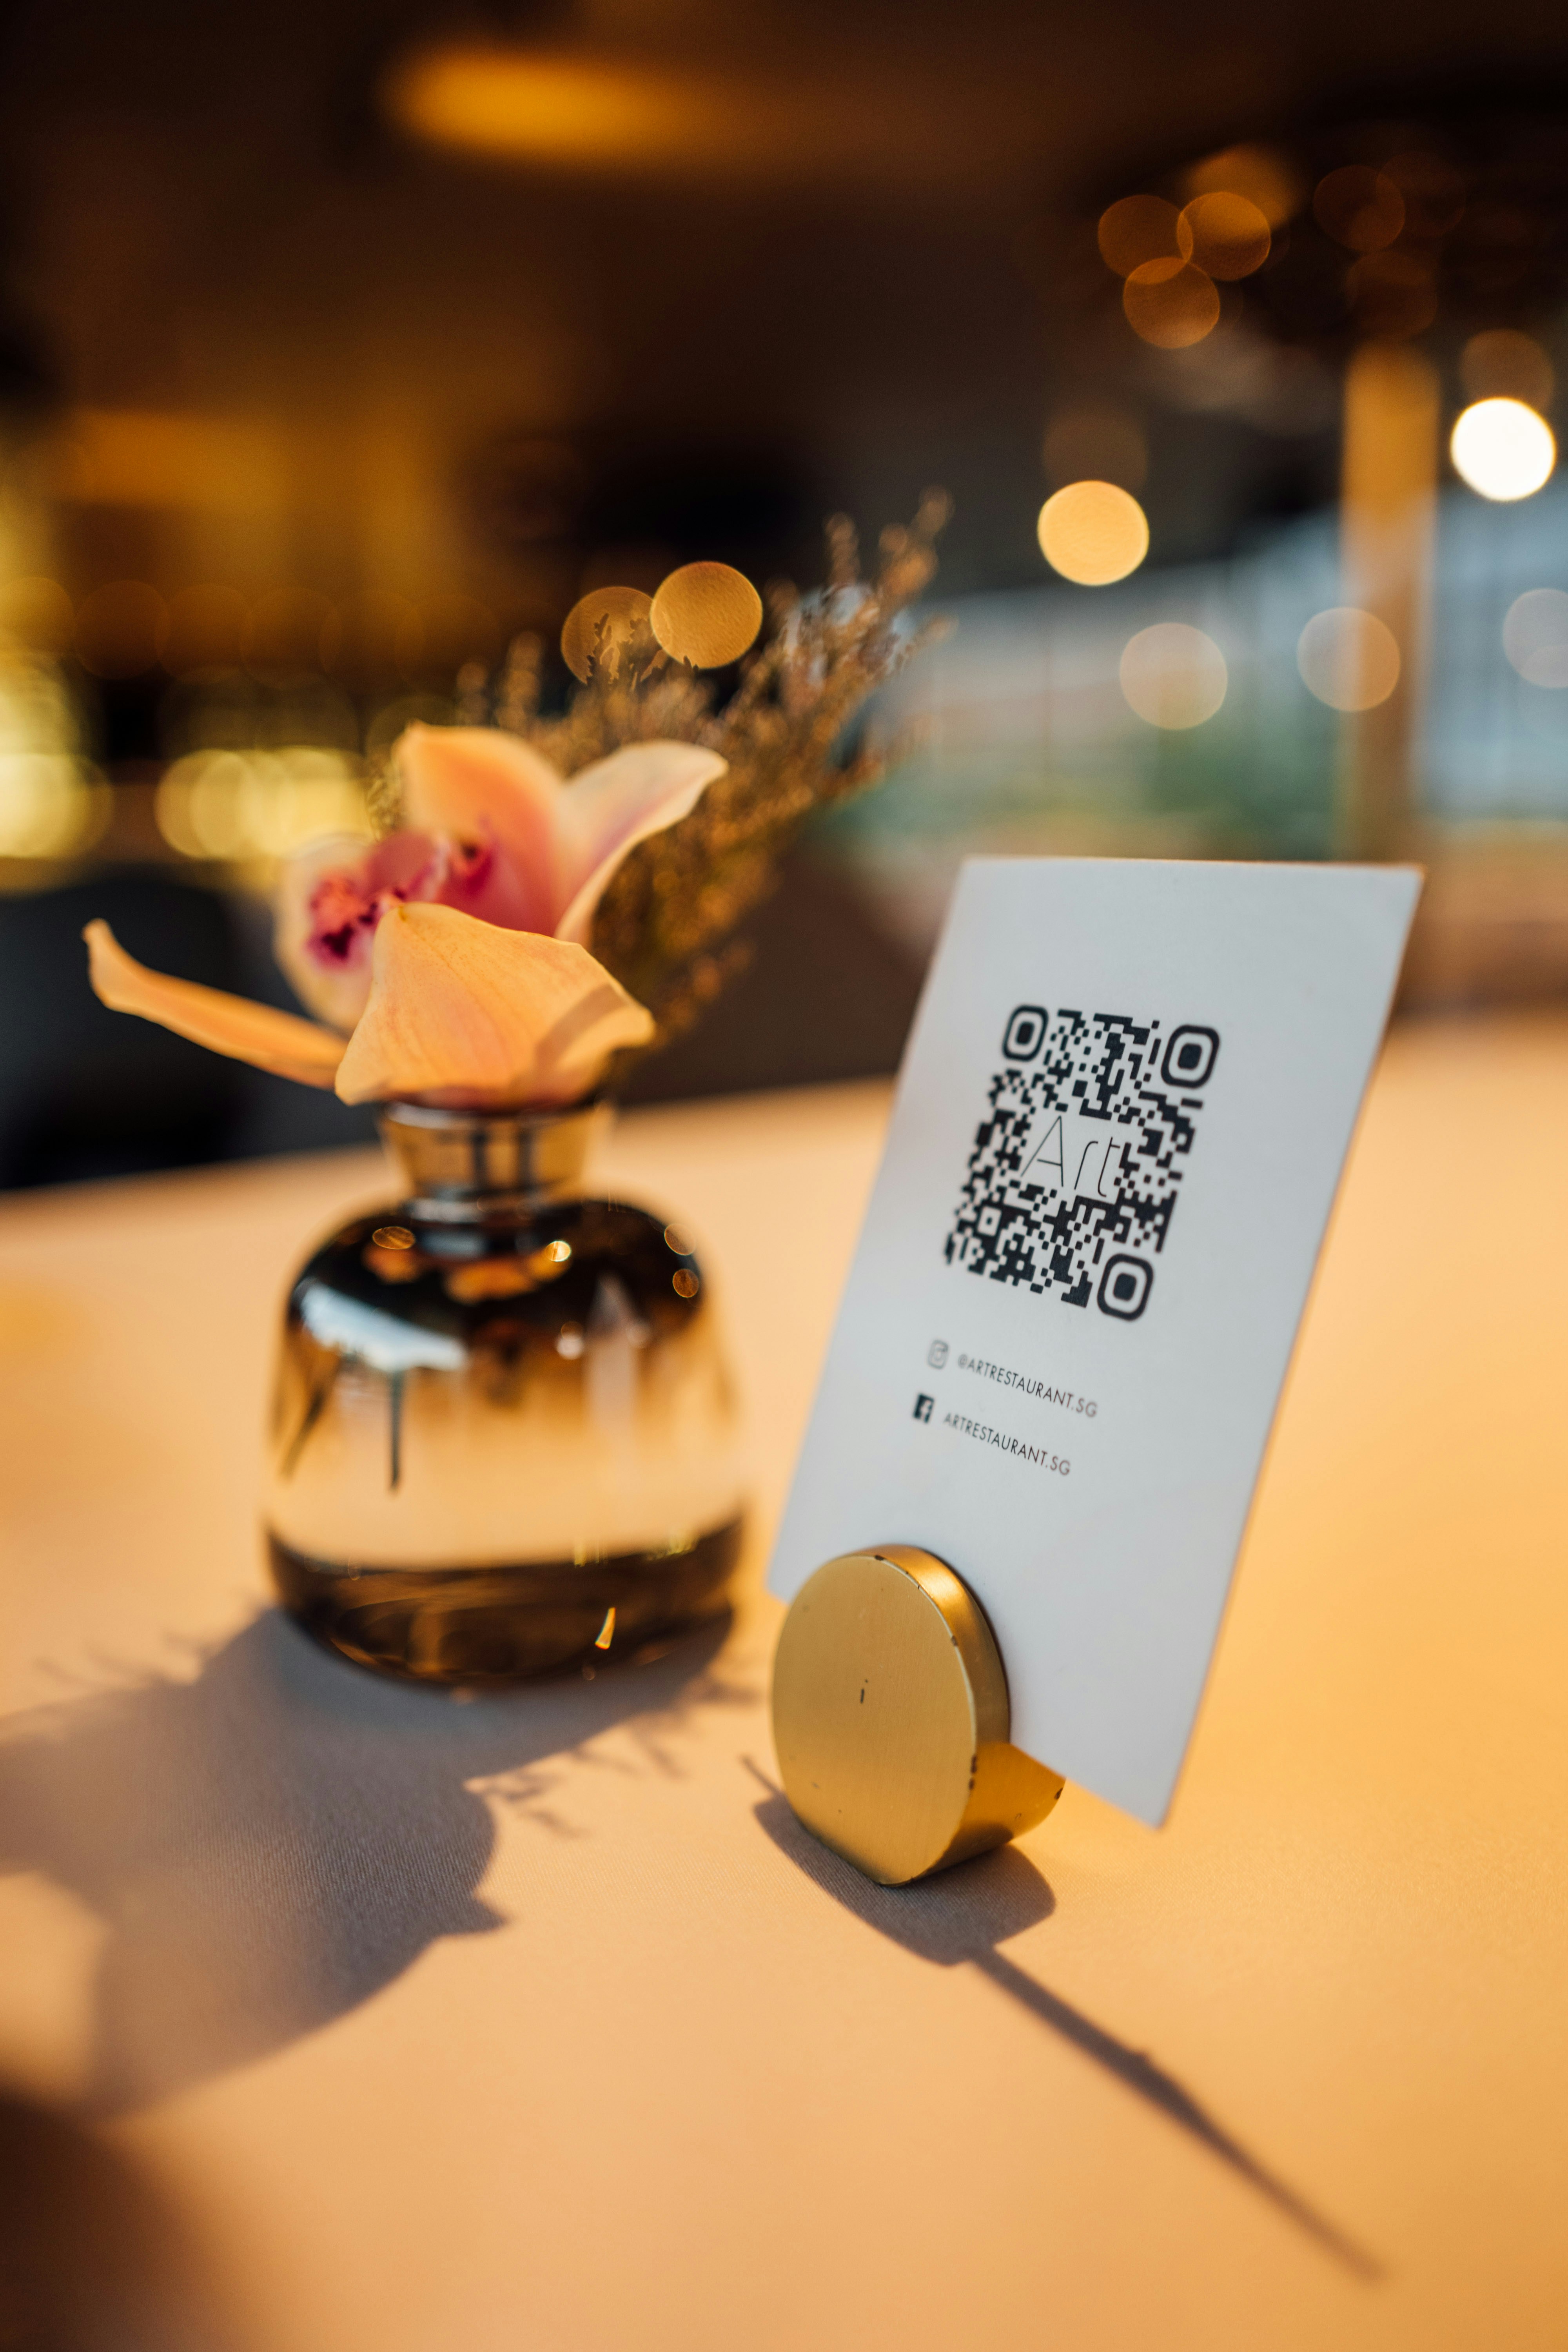 Example of restaurant menu with QR Code